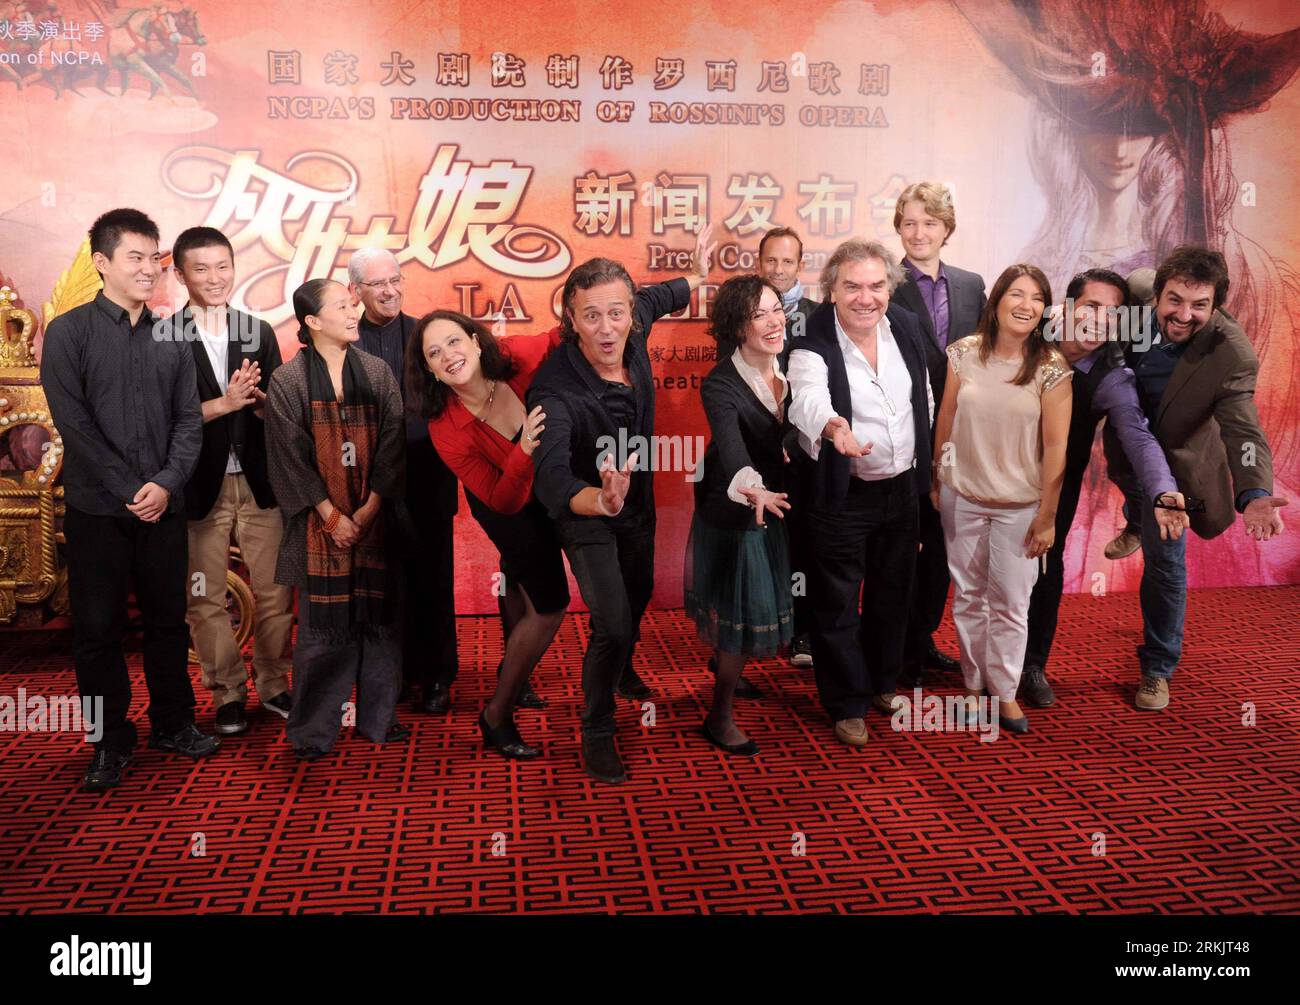 Bildnummer: 56161890  Datum: 09.10.2011  Copyright: imago/Xinhua (111009) -- BEIJING, Oct. 9, 2011 (Xinhua) -- The crew of the opera La Cenerentola poses for a photo on the press conference in Beijing, capital of China, Oct. 9, 2011. La Cenerentola, a three-act opera adapted by Gioachino Rossini, will be presented on the stage in Beijing from Oct. 20 to Oct. 23. The National Centre for the Performing Arts(NCPA) invited the international crew to create this well-known comic opera. (Xinhua/Luo Xiaoguang) (jy) CHINA-BEIJING-OPERA PUBLICATIONxNOTxINxCHN People Musik Kultur Oper PK x0x xtm 2011 que Stock Photo